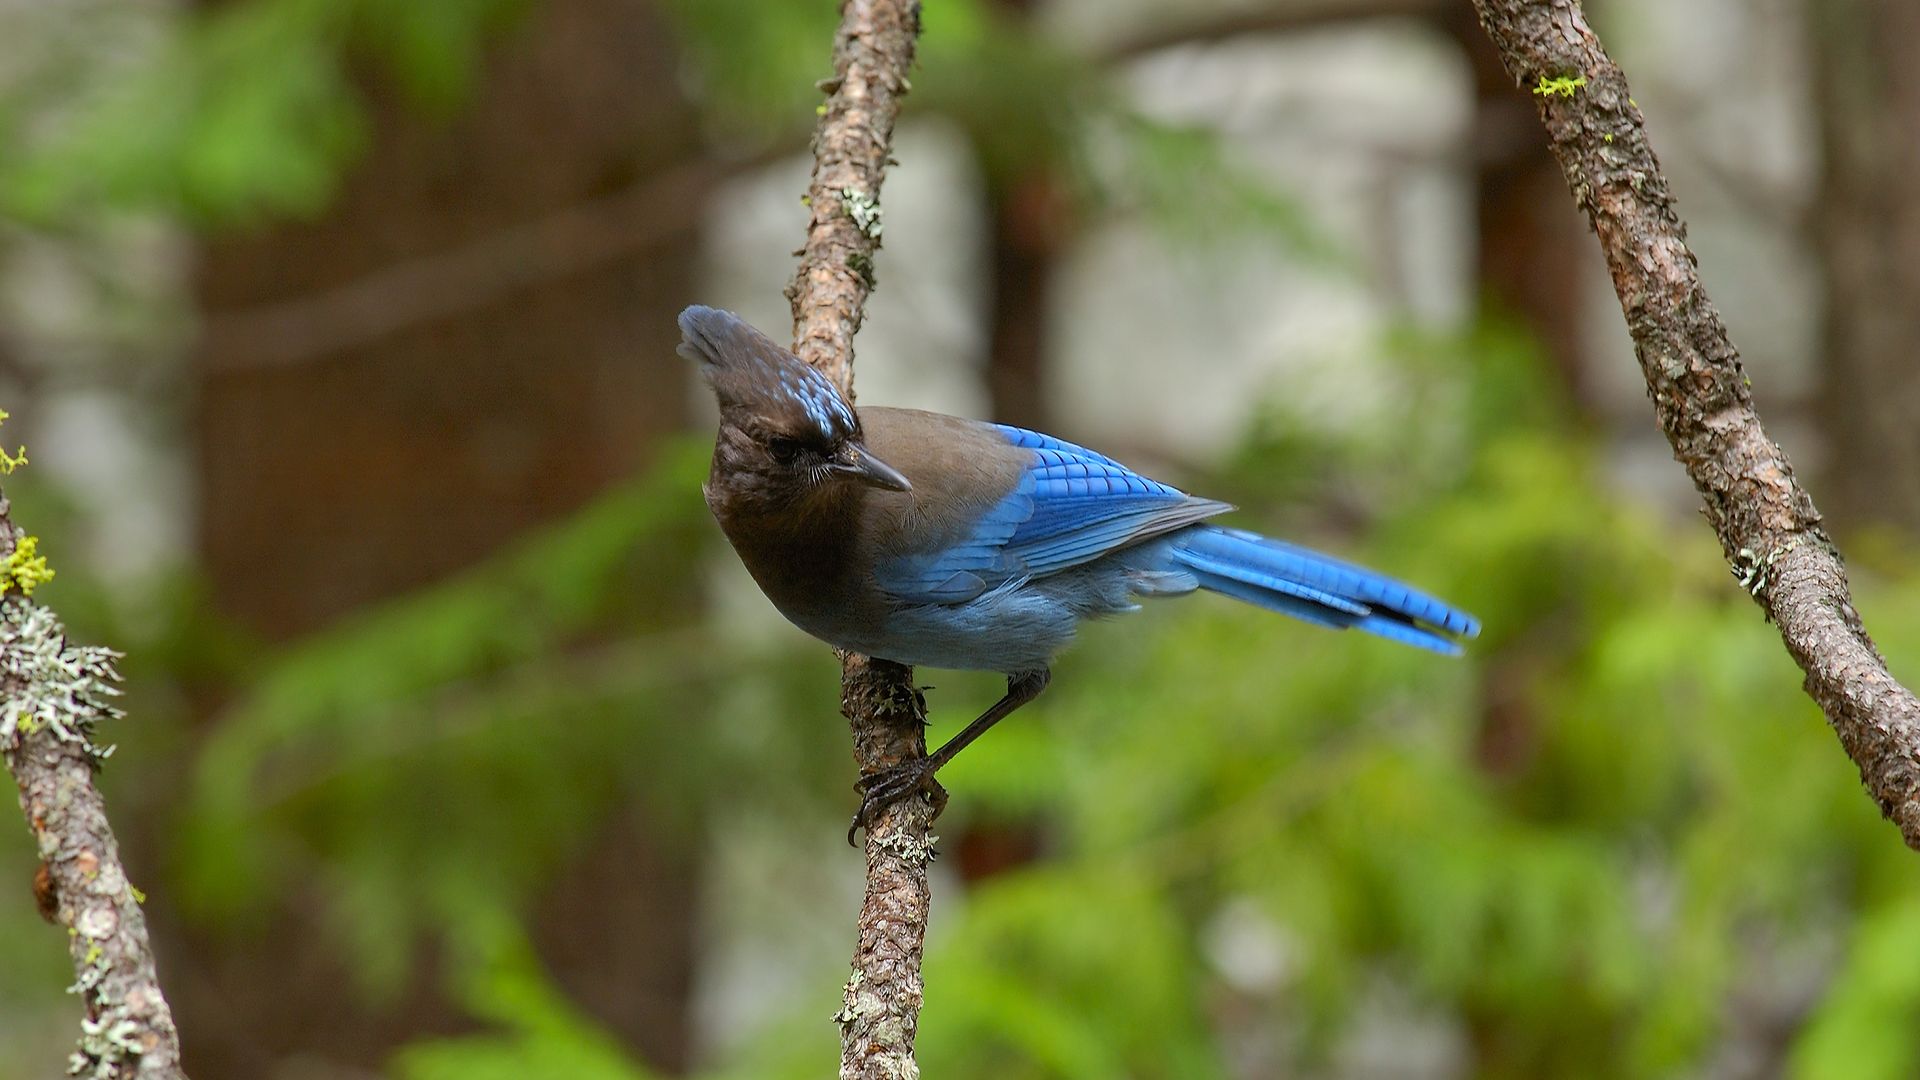 A blue crested Steller's jay on a lichen-covered branch